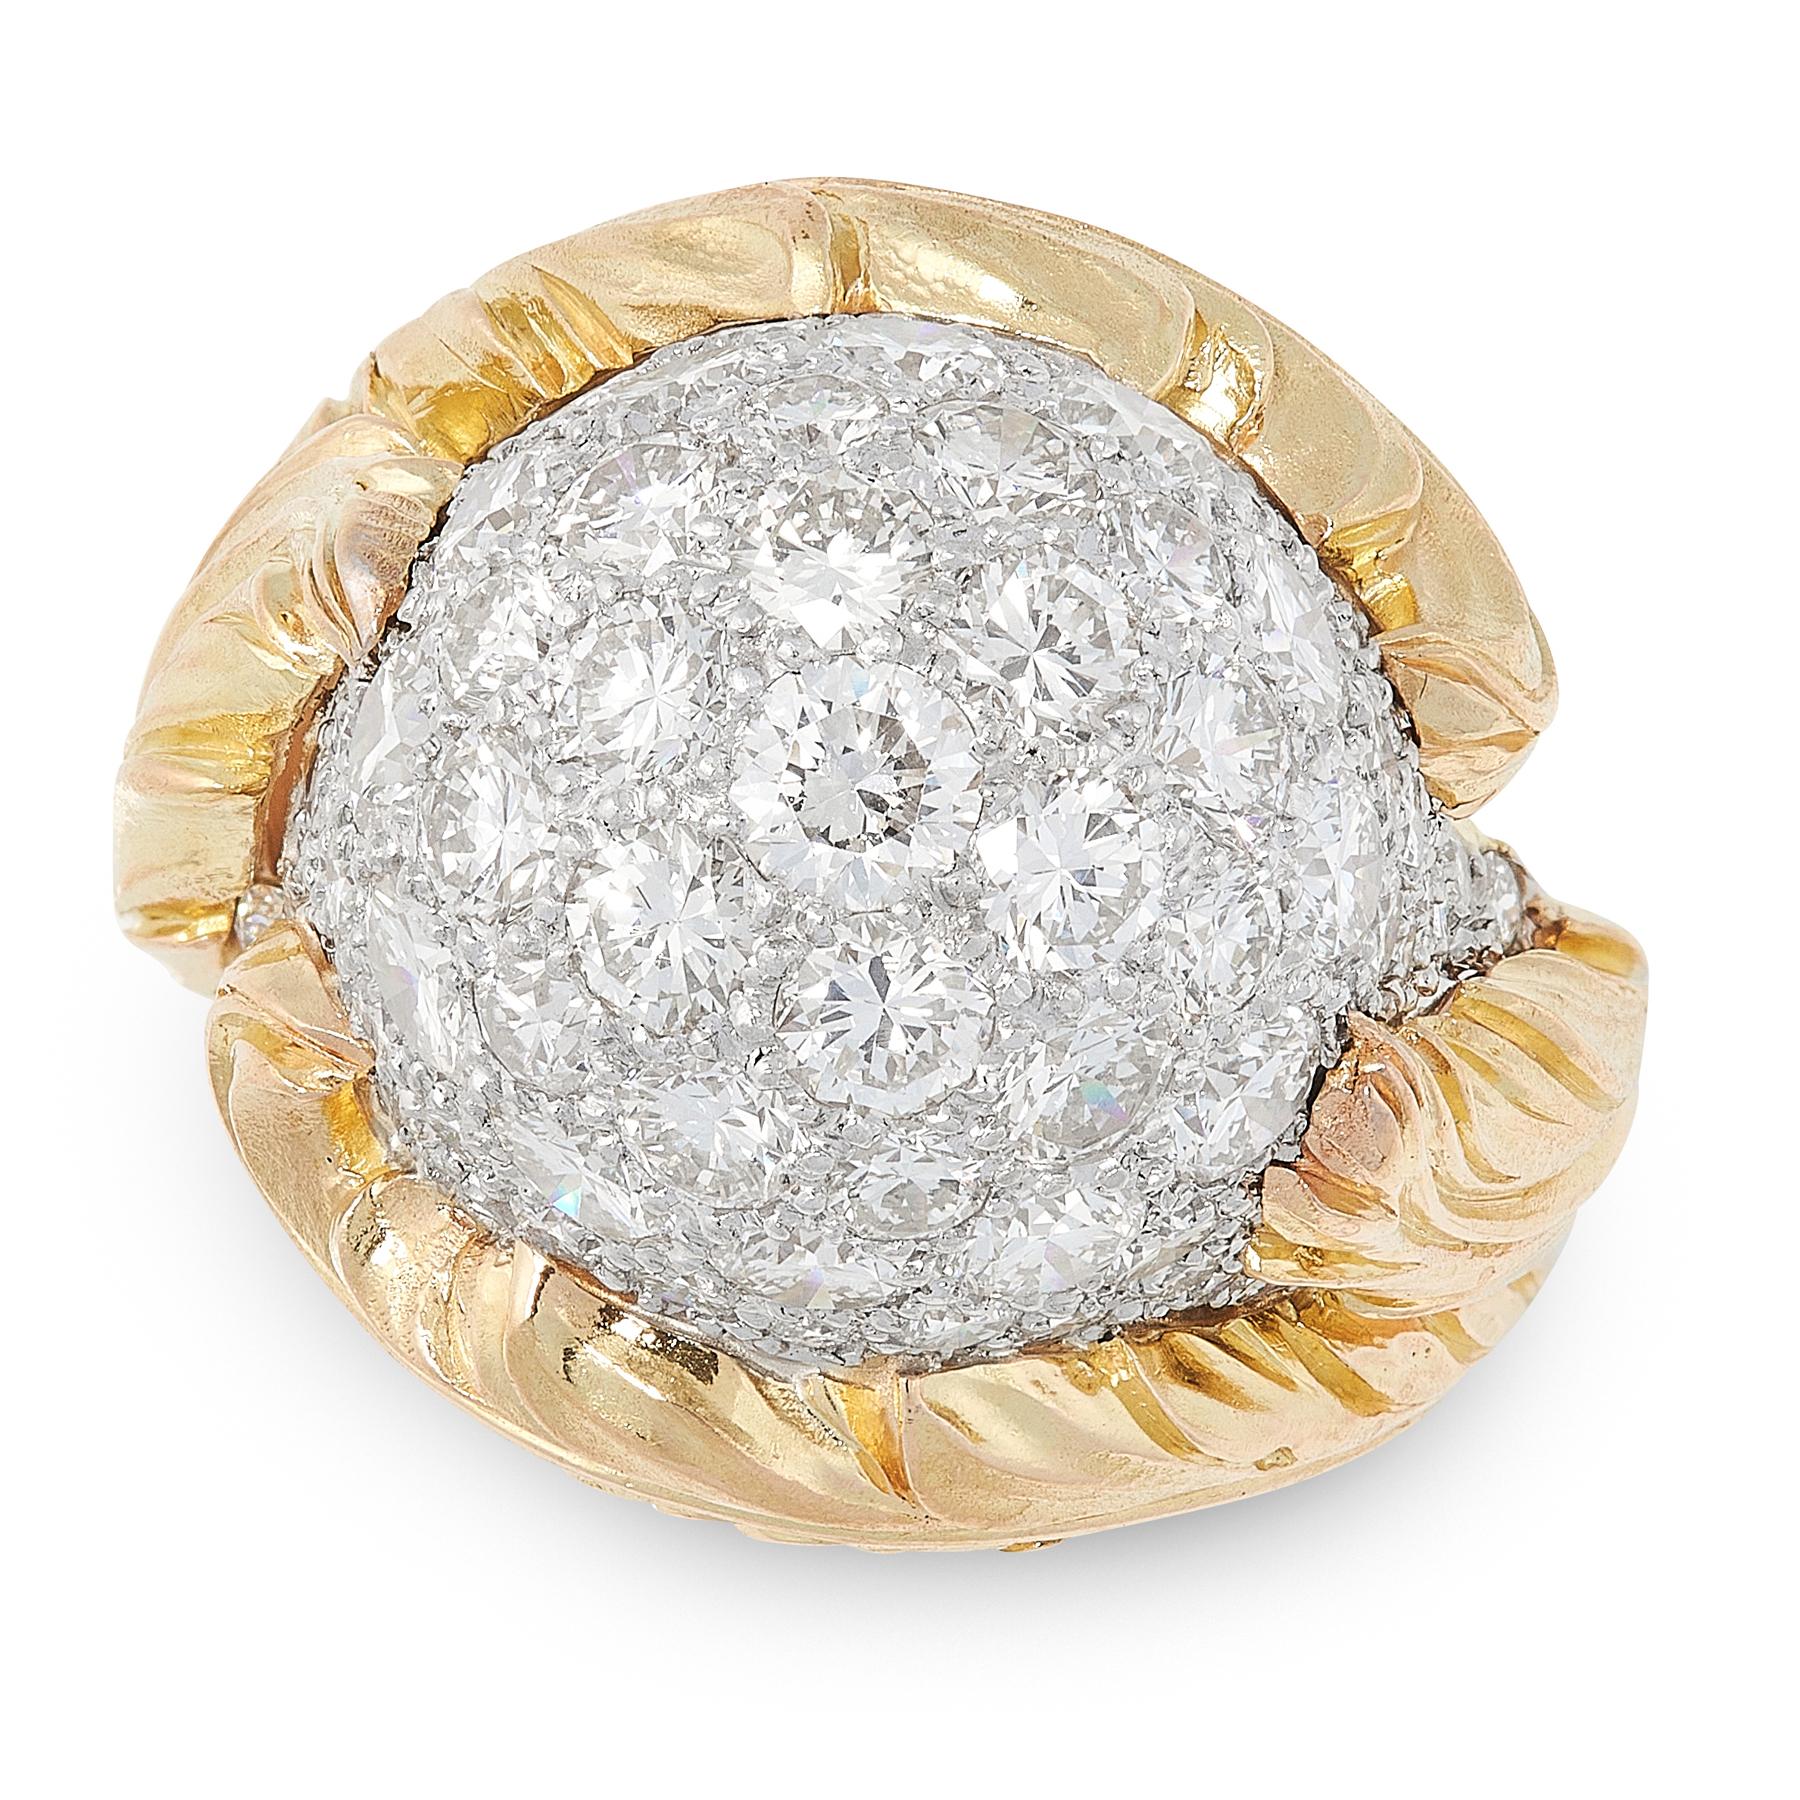 A vintage diamond bombe dress ring, the central ball motif jewelled allover with round cut diamonds totalling 3.5-4.5 carats, within a textured foliate designed band, size N / 6.5.

Gross weight: 16.9g.